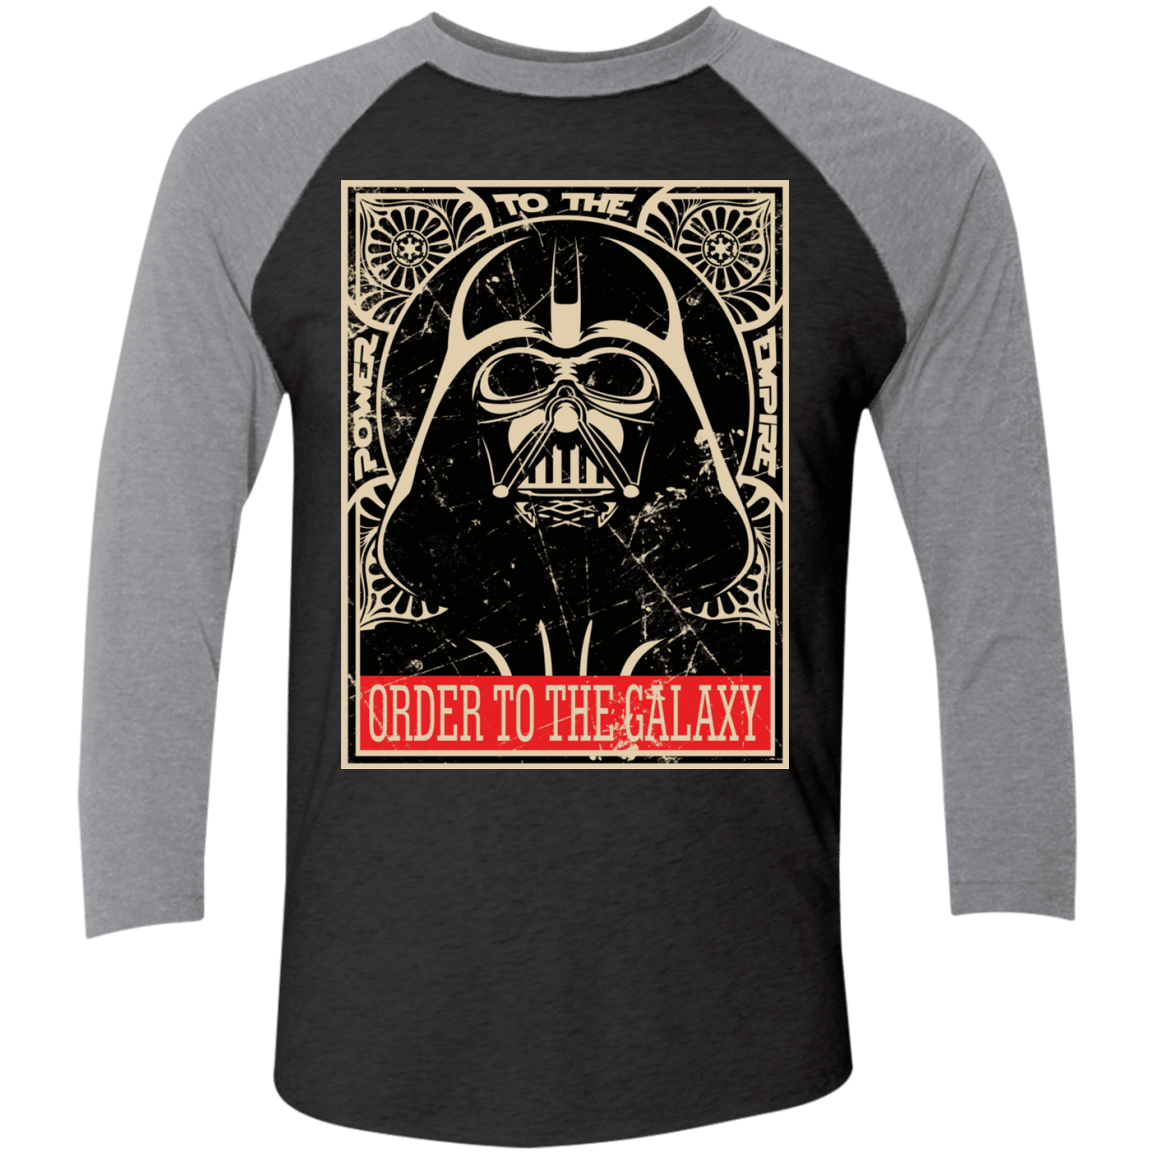 T-Shirts Vintage Black/Premium Heather / X-Small Order to the galaxy Men's Triblend 3/4 Sleeve